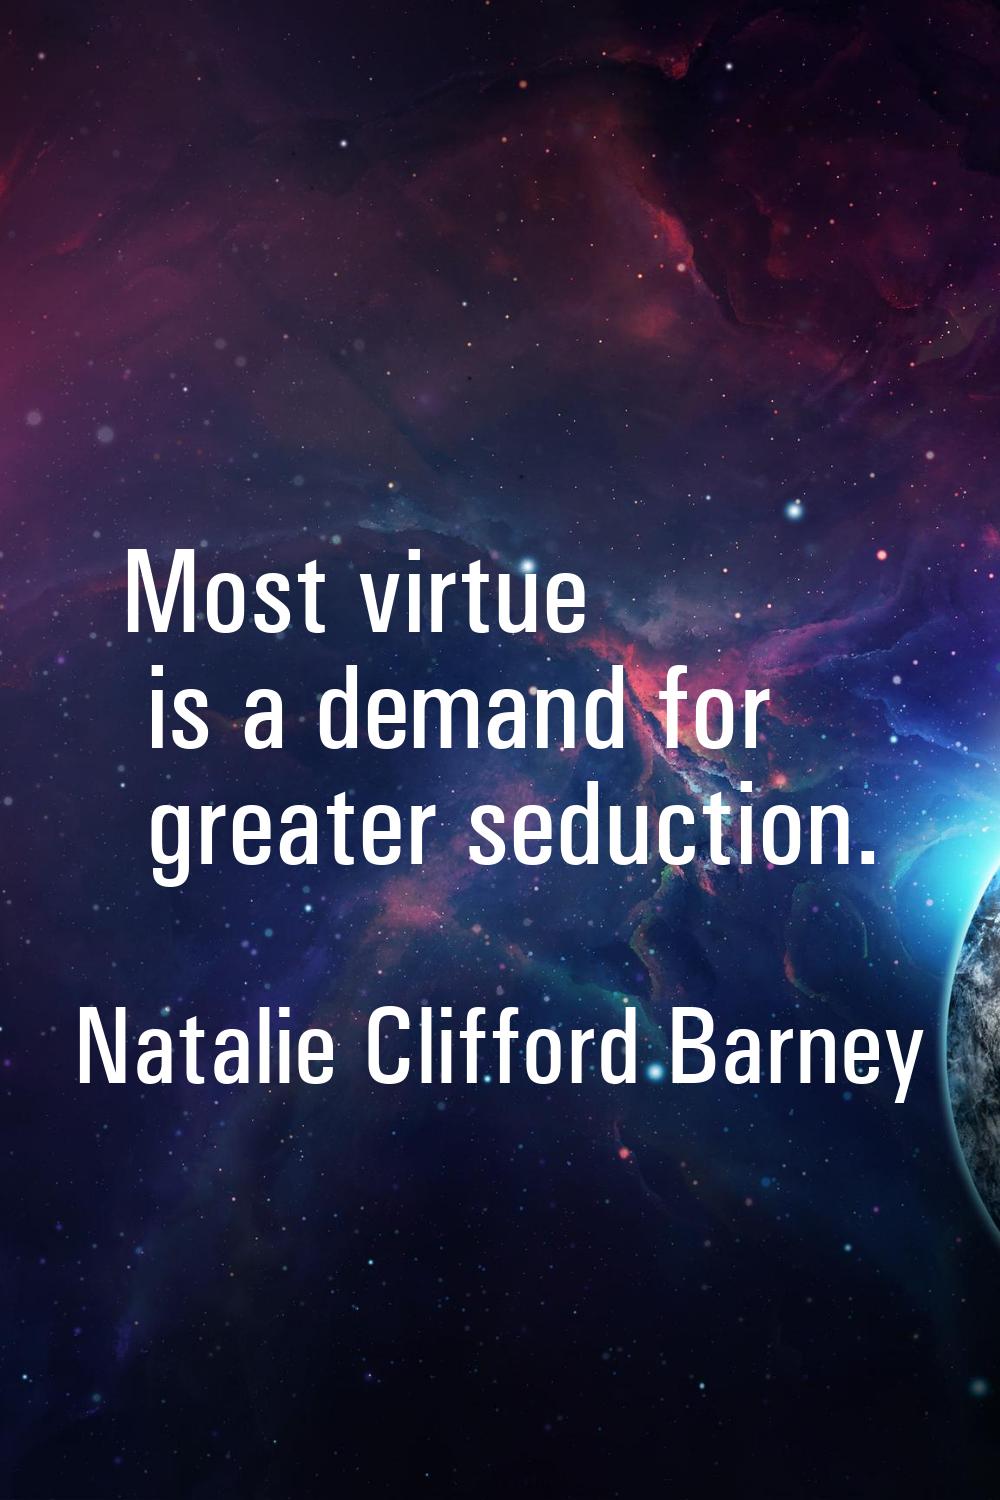 Most virtue is a demand for greater seduction.